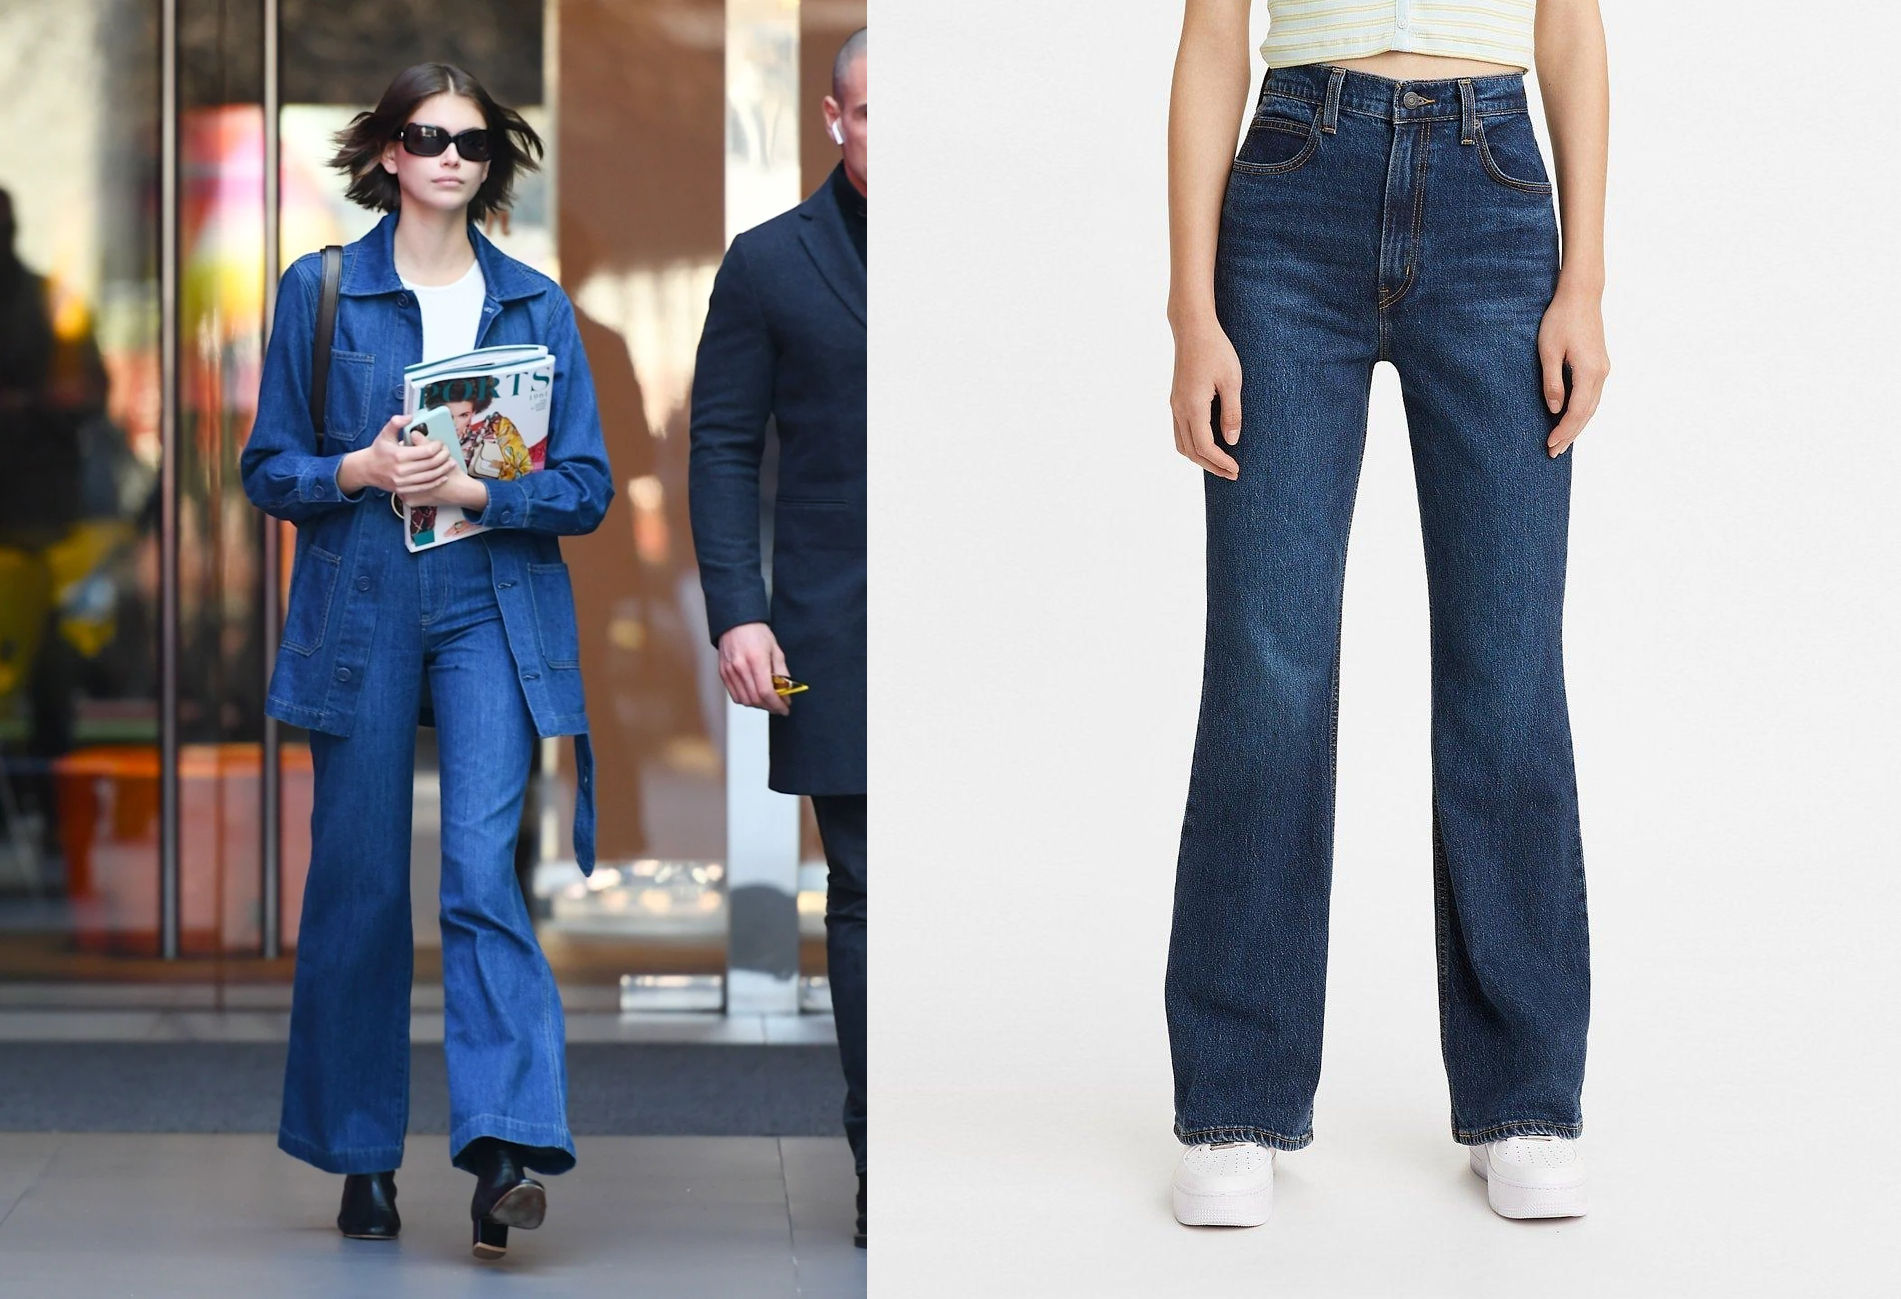 Vervoer Diagnostiseren slecht The 70s denim trend is back! Here's how to wear and flaunt flare jeans